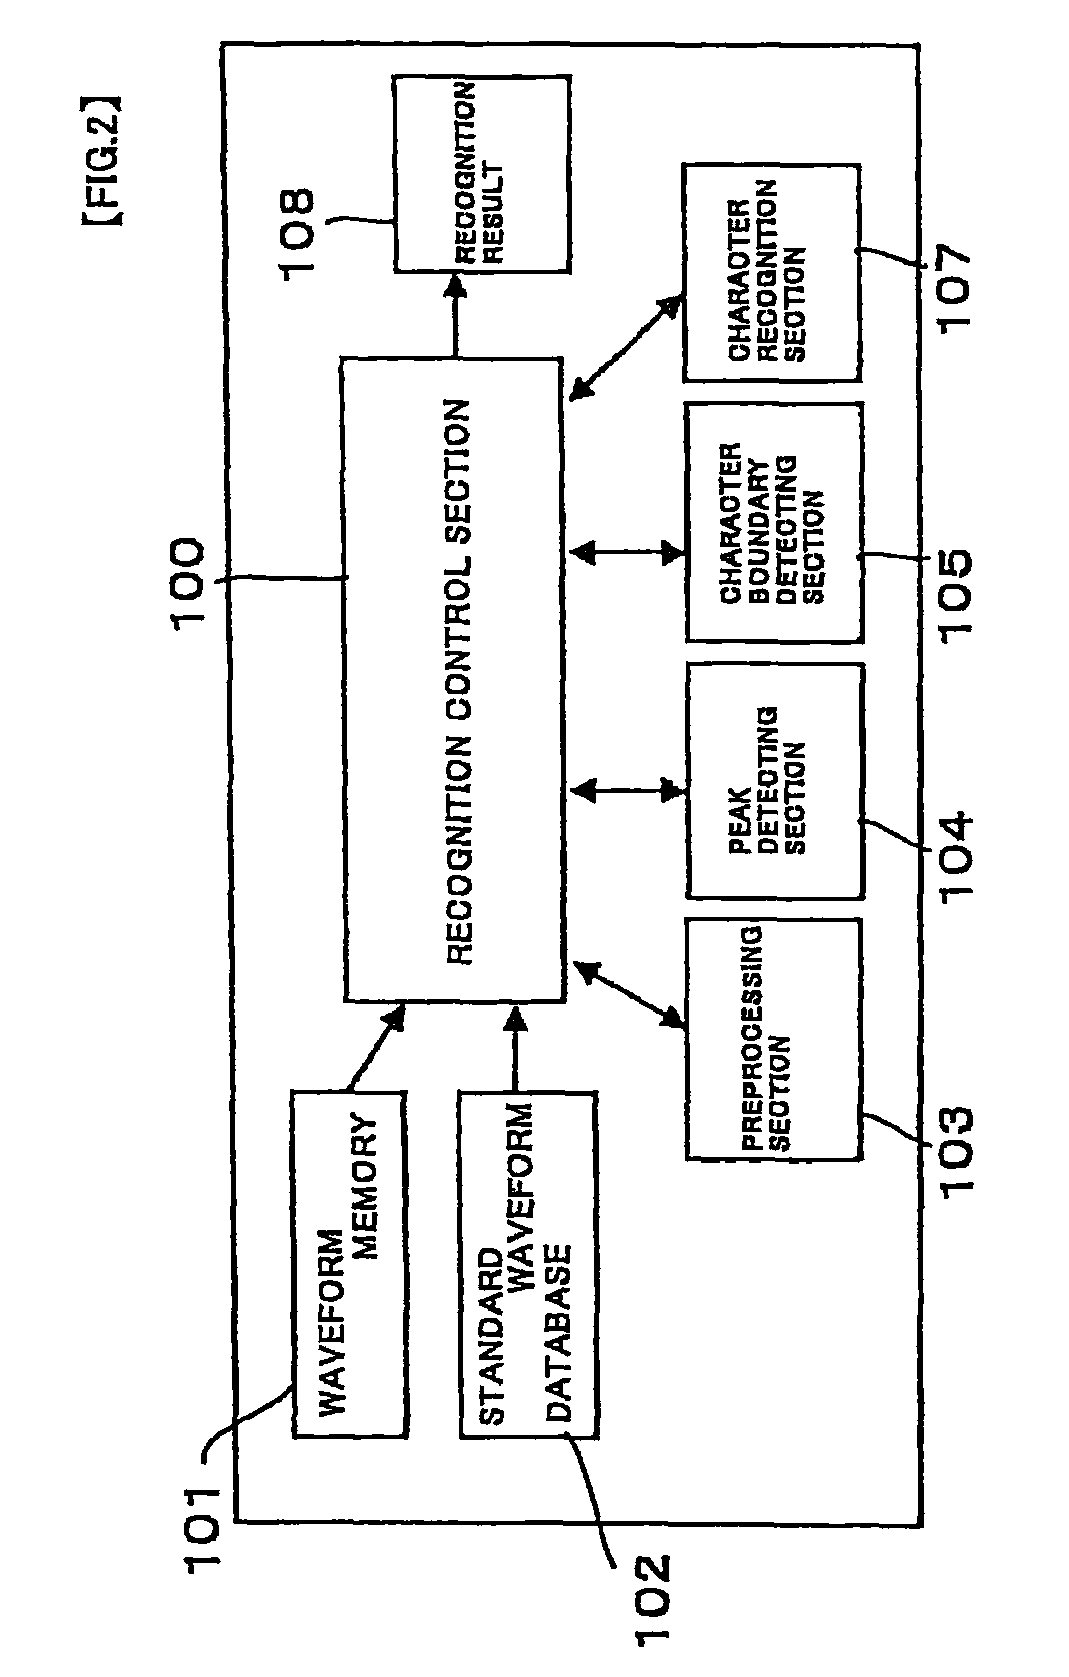 Method and apparatus for magnetic character recognition